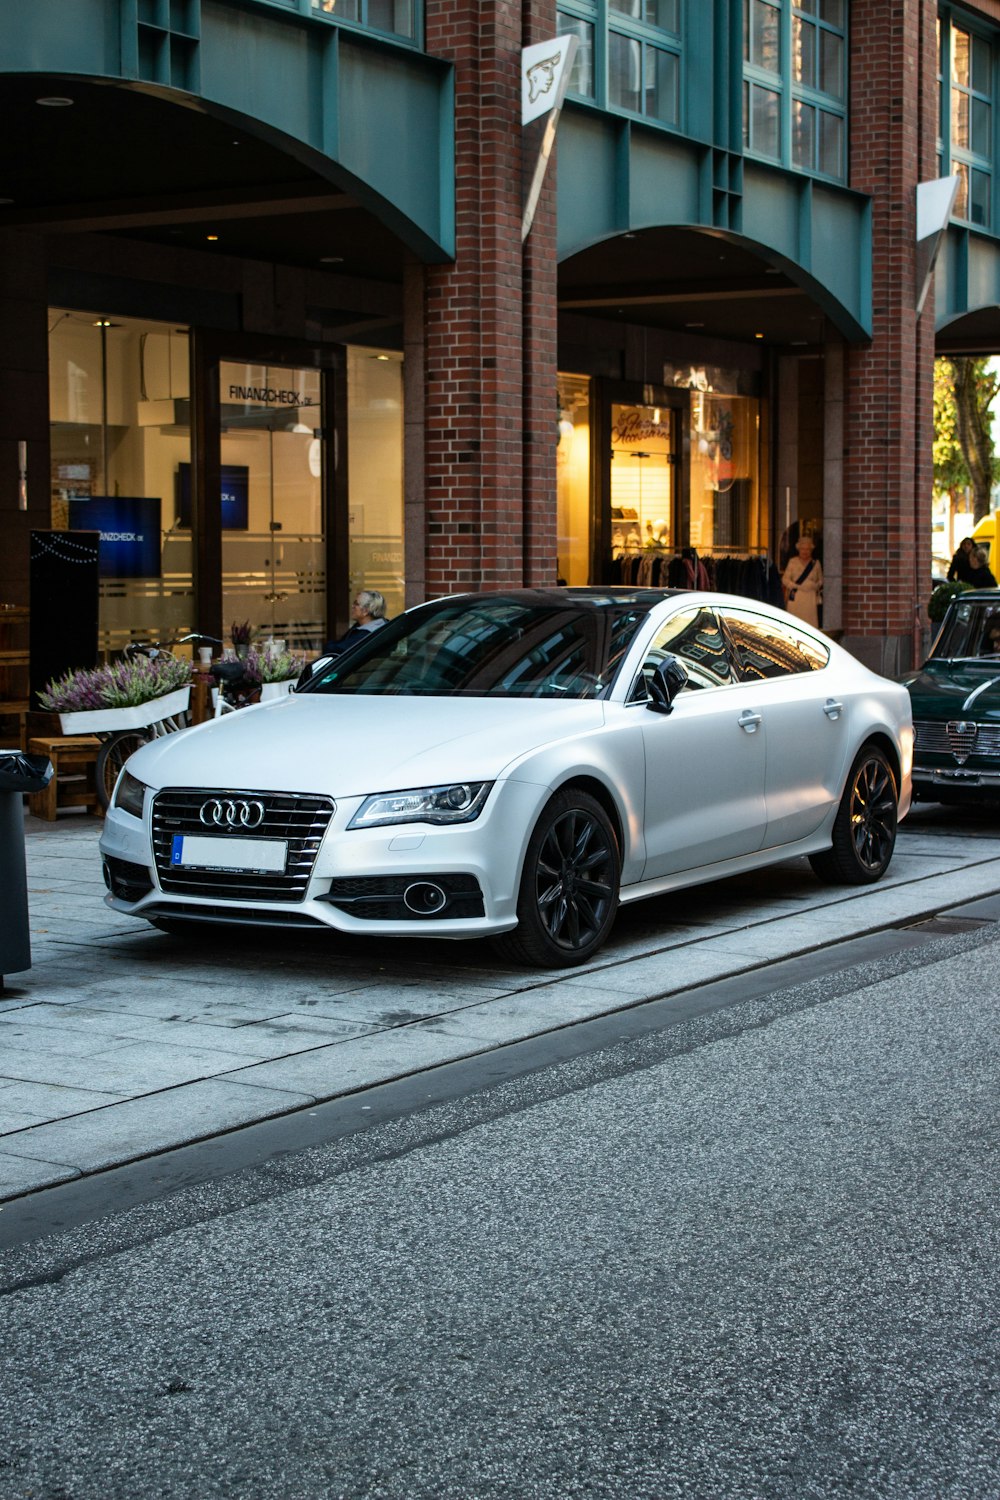 Audi A6 Pictures  Download Free Images on Unsplash